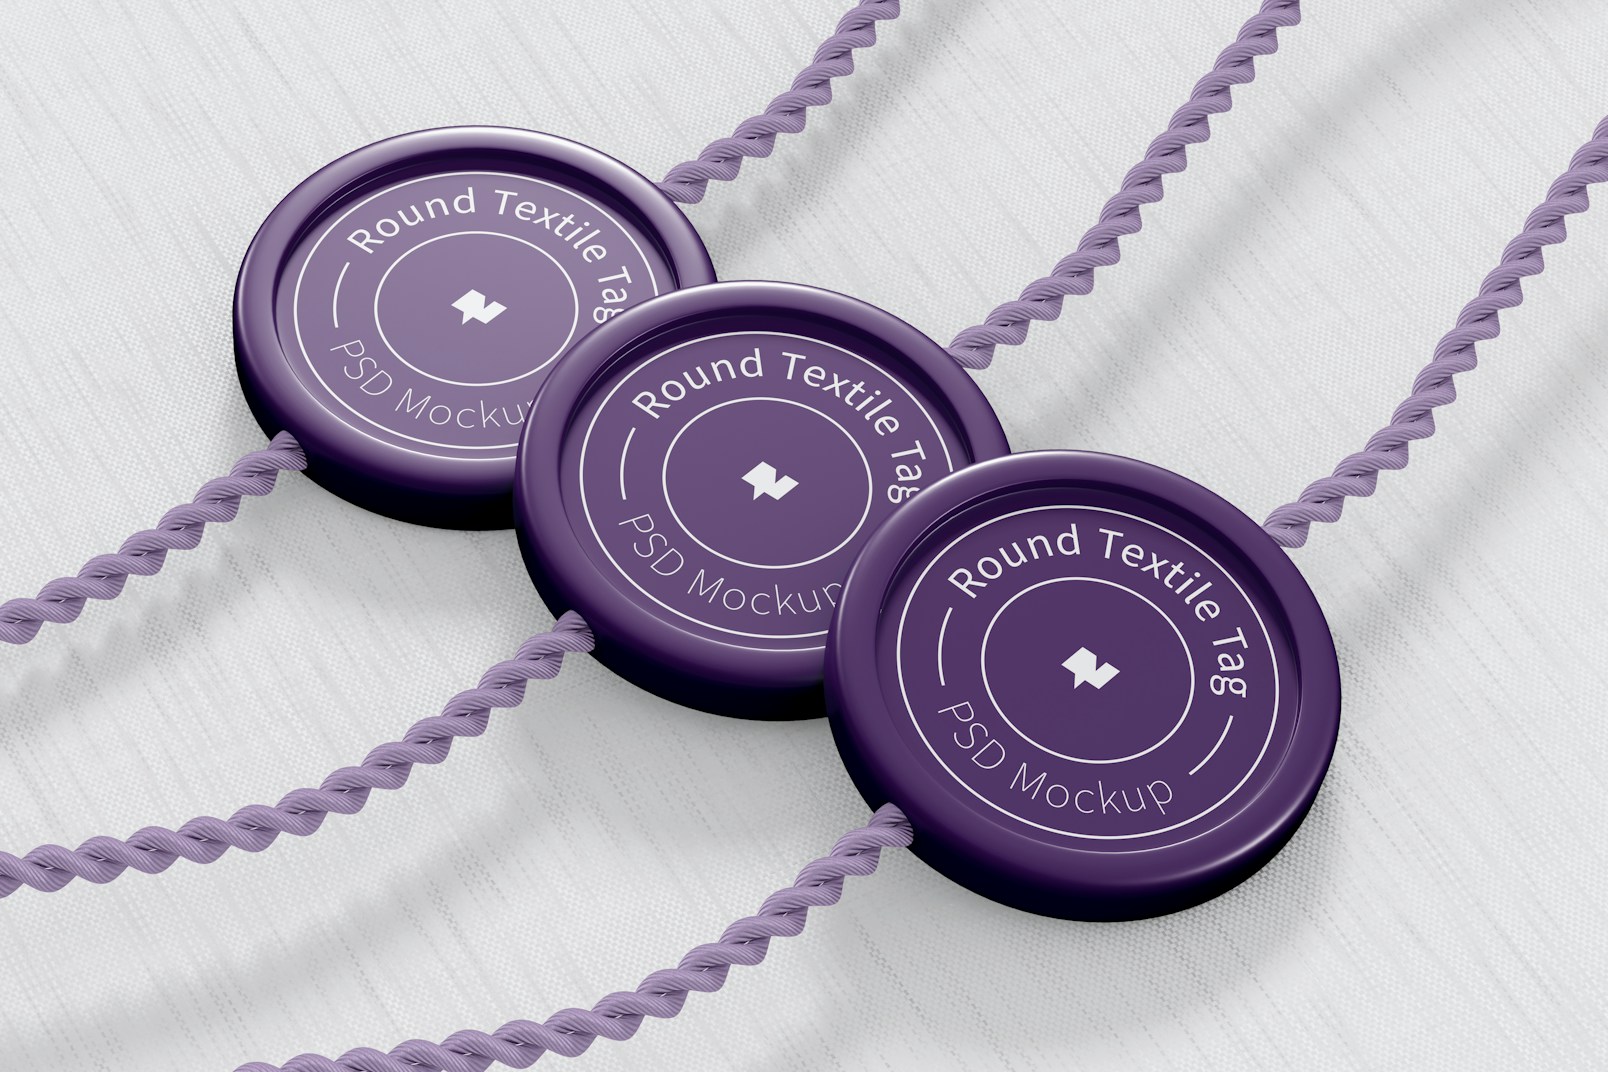 Round Textile Tags Mockup